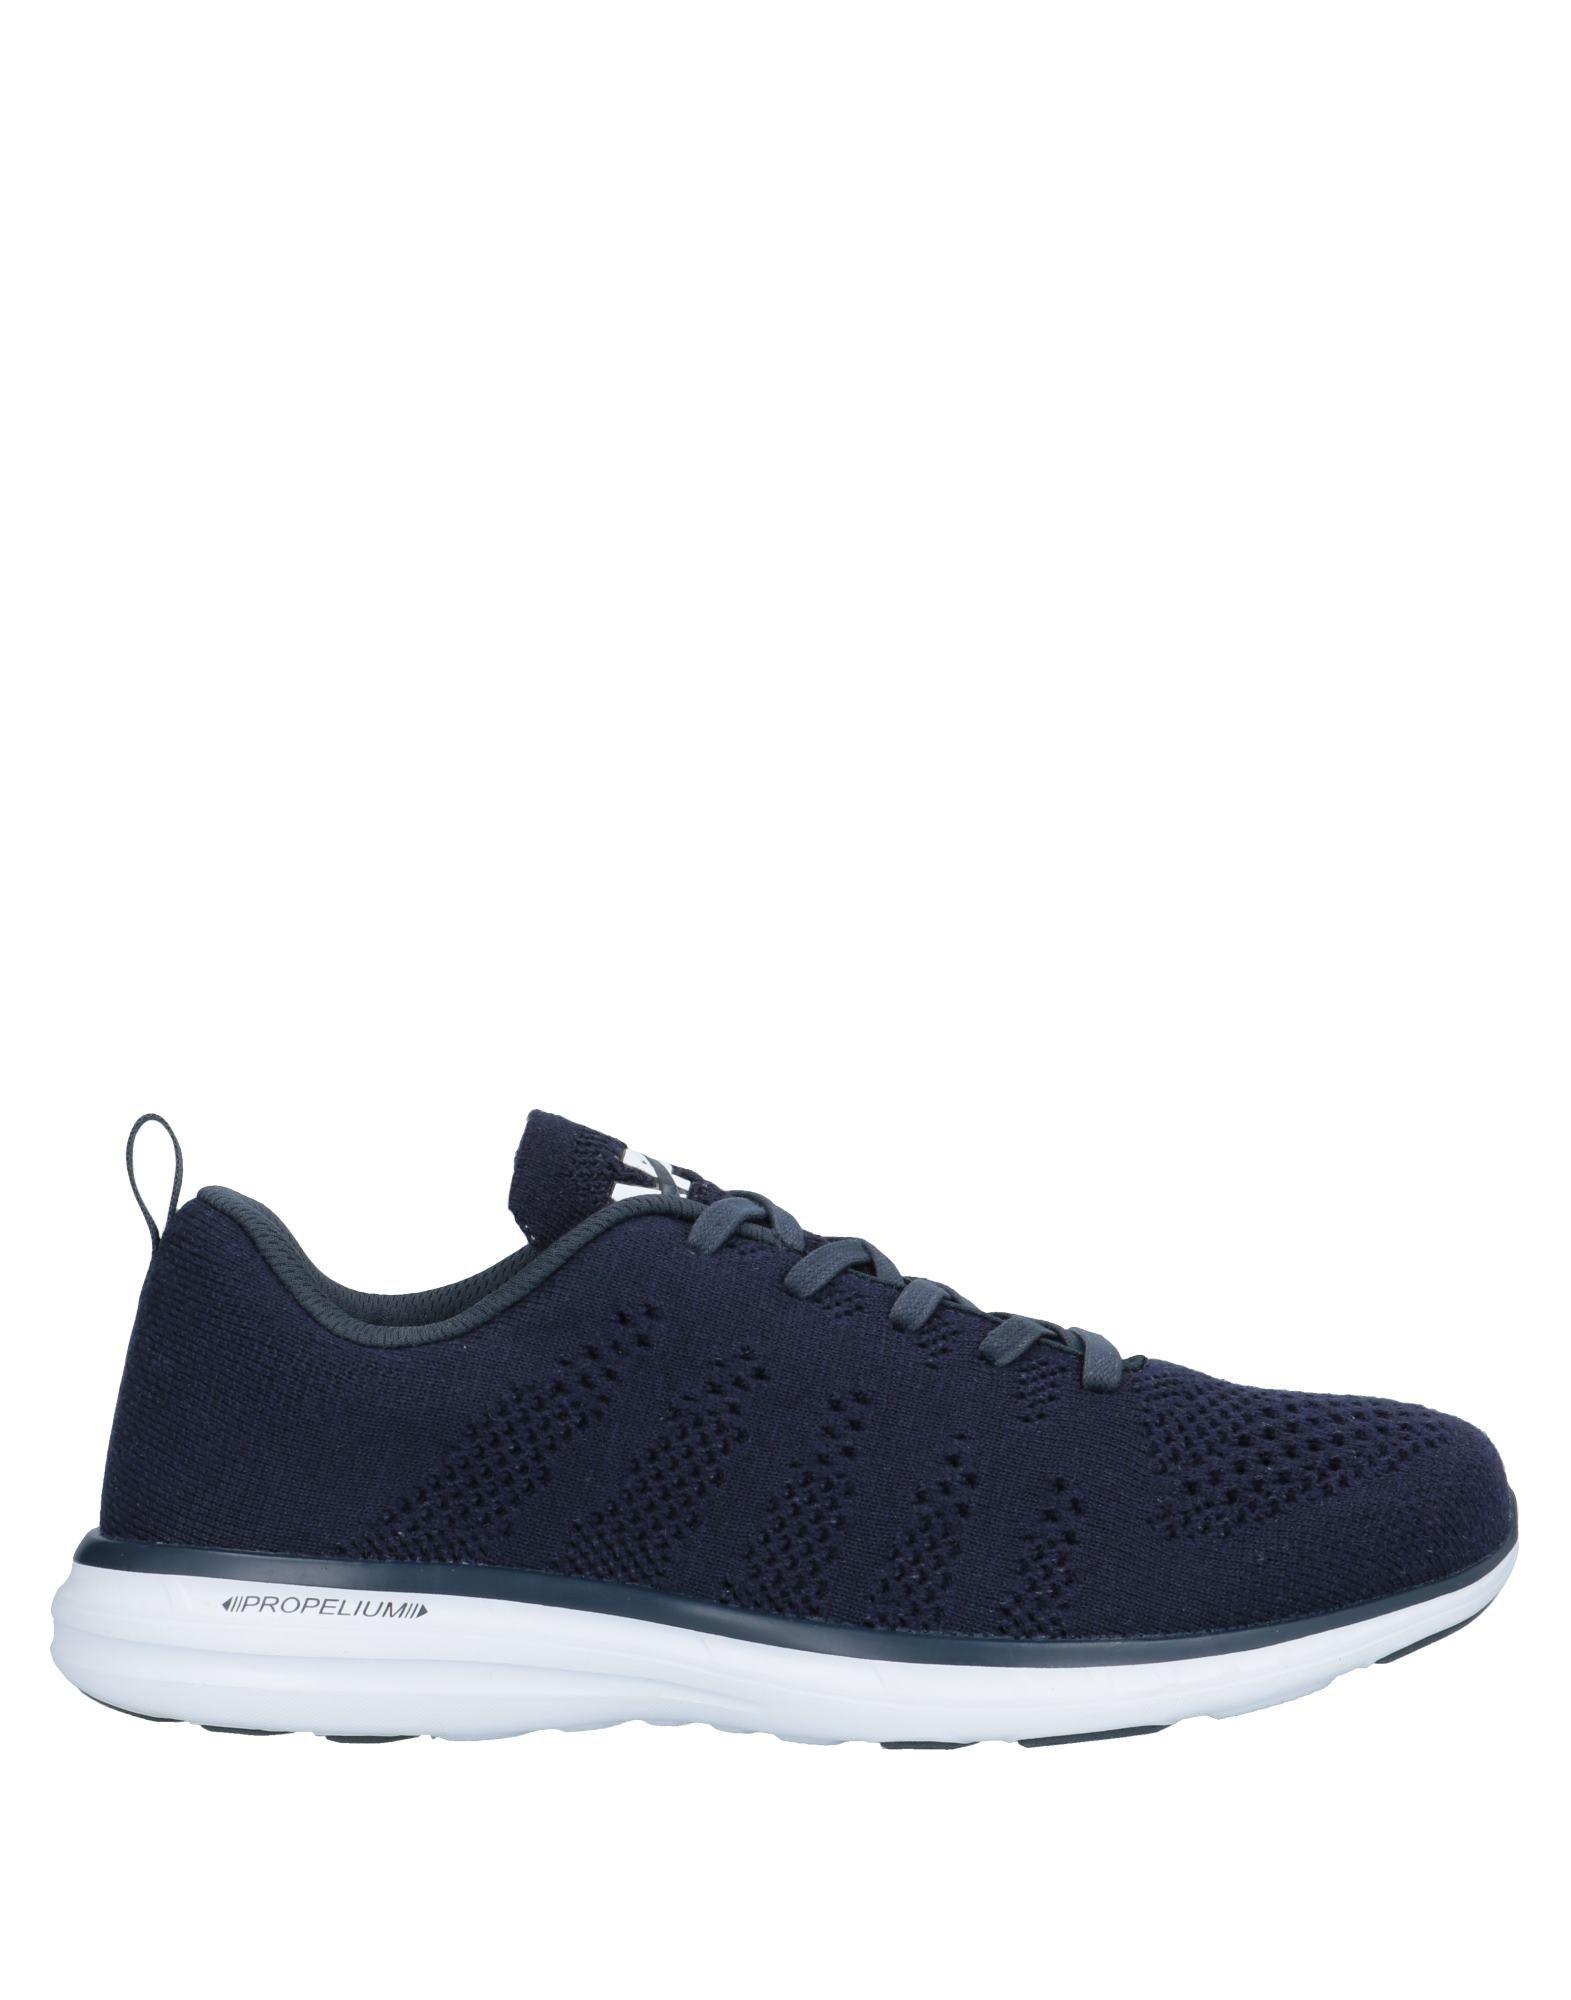 APL Shoes Low-tops & Sneakers in Dark Blue (Blue) for Men - Save 8% - Lyst